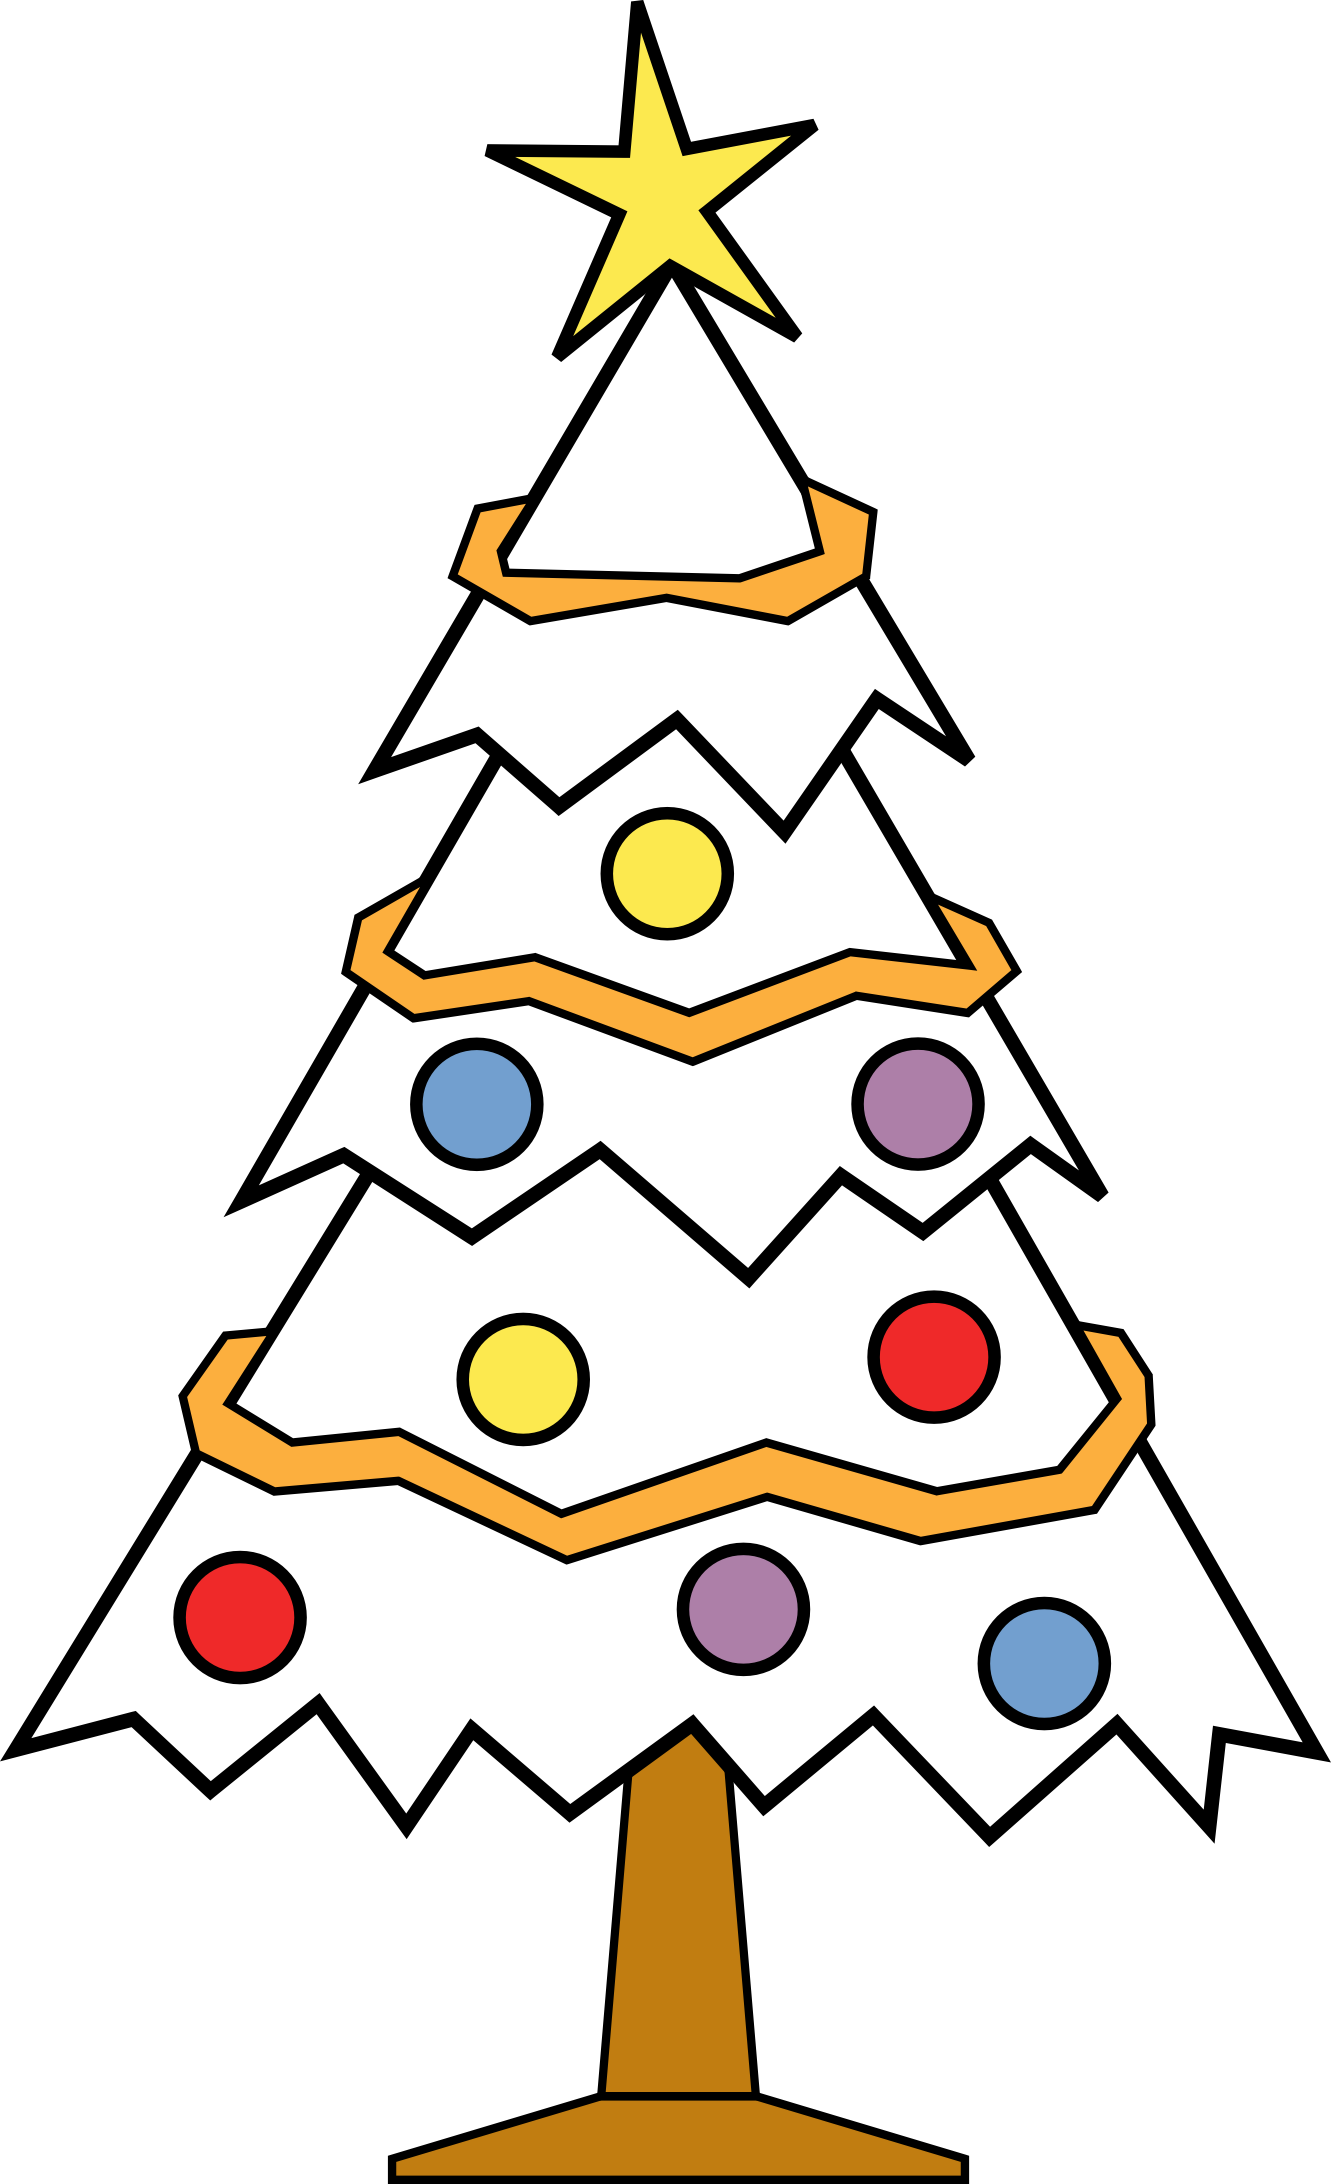 Free Christmas Tree Black And White Clipart, Download Free Clip Art, Free Clip Art on Clipart ...